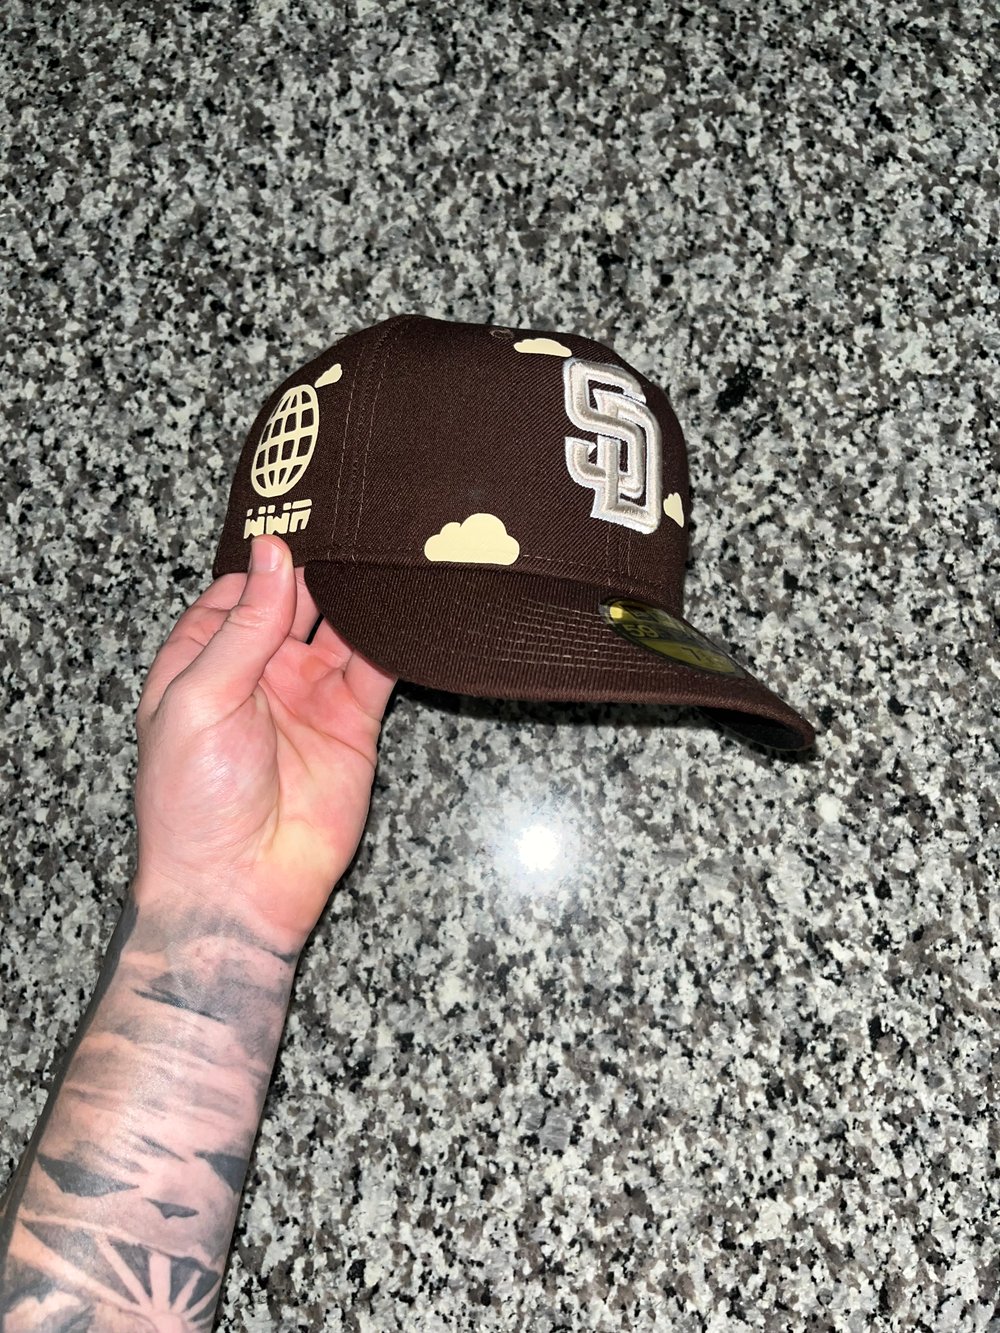 https://assets.bigcartel.com/product_images/38ac8f1f-5e99-485f-a5ee-8a130fe235c5/partly-creamy-skies-san-diego-custom-fitted.jpg?auto=format&fit=max&w=1000